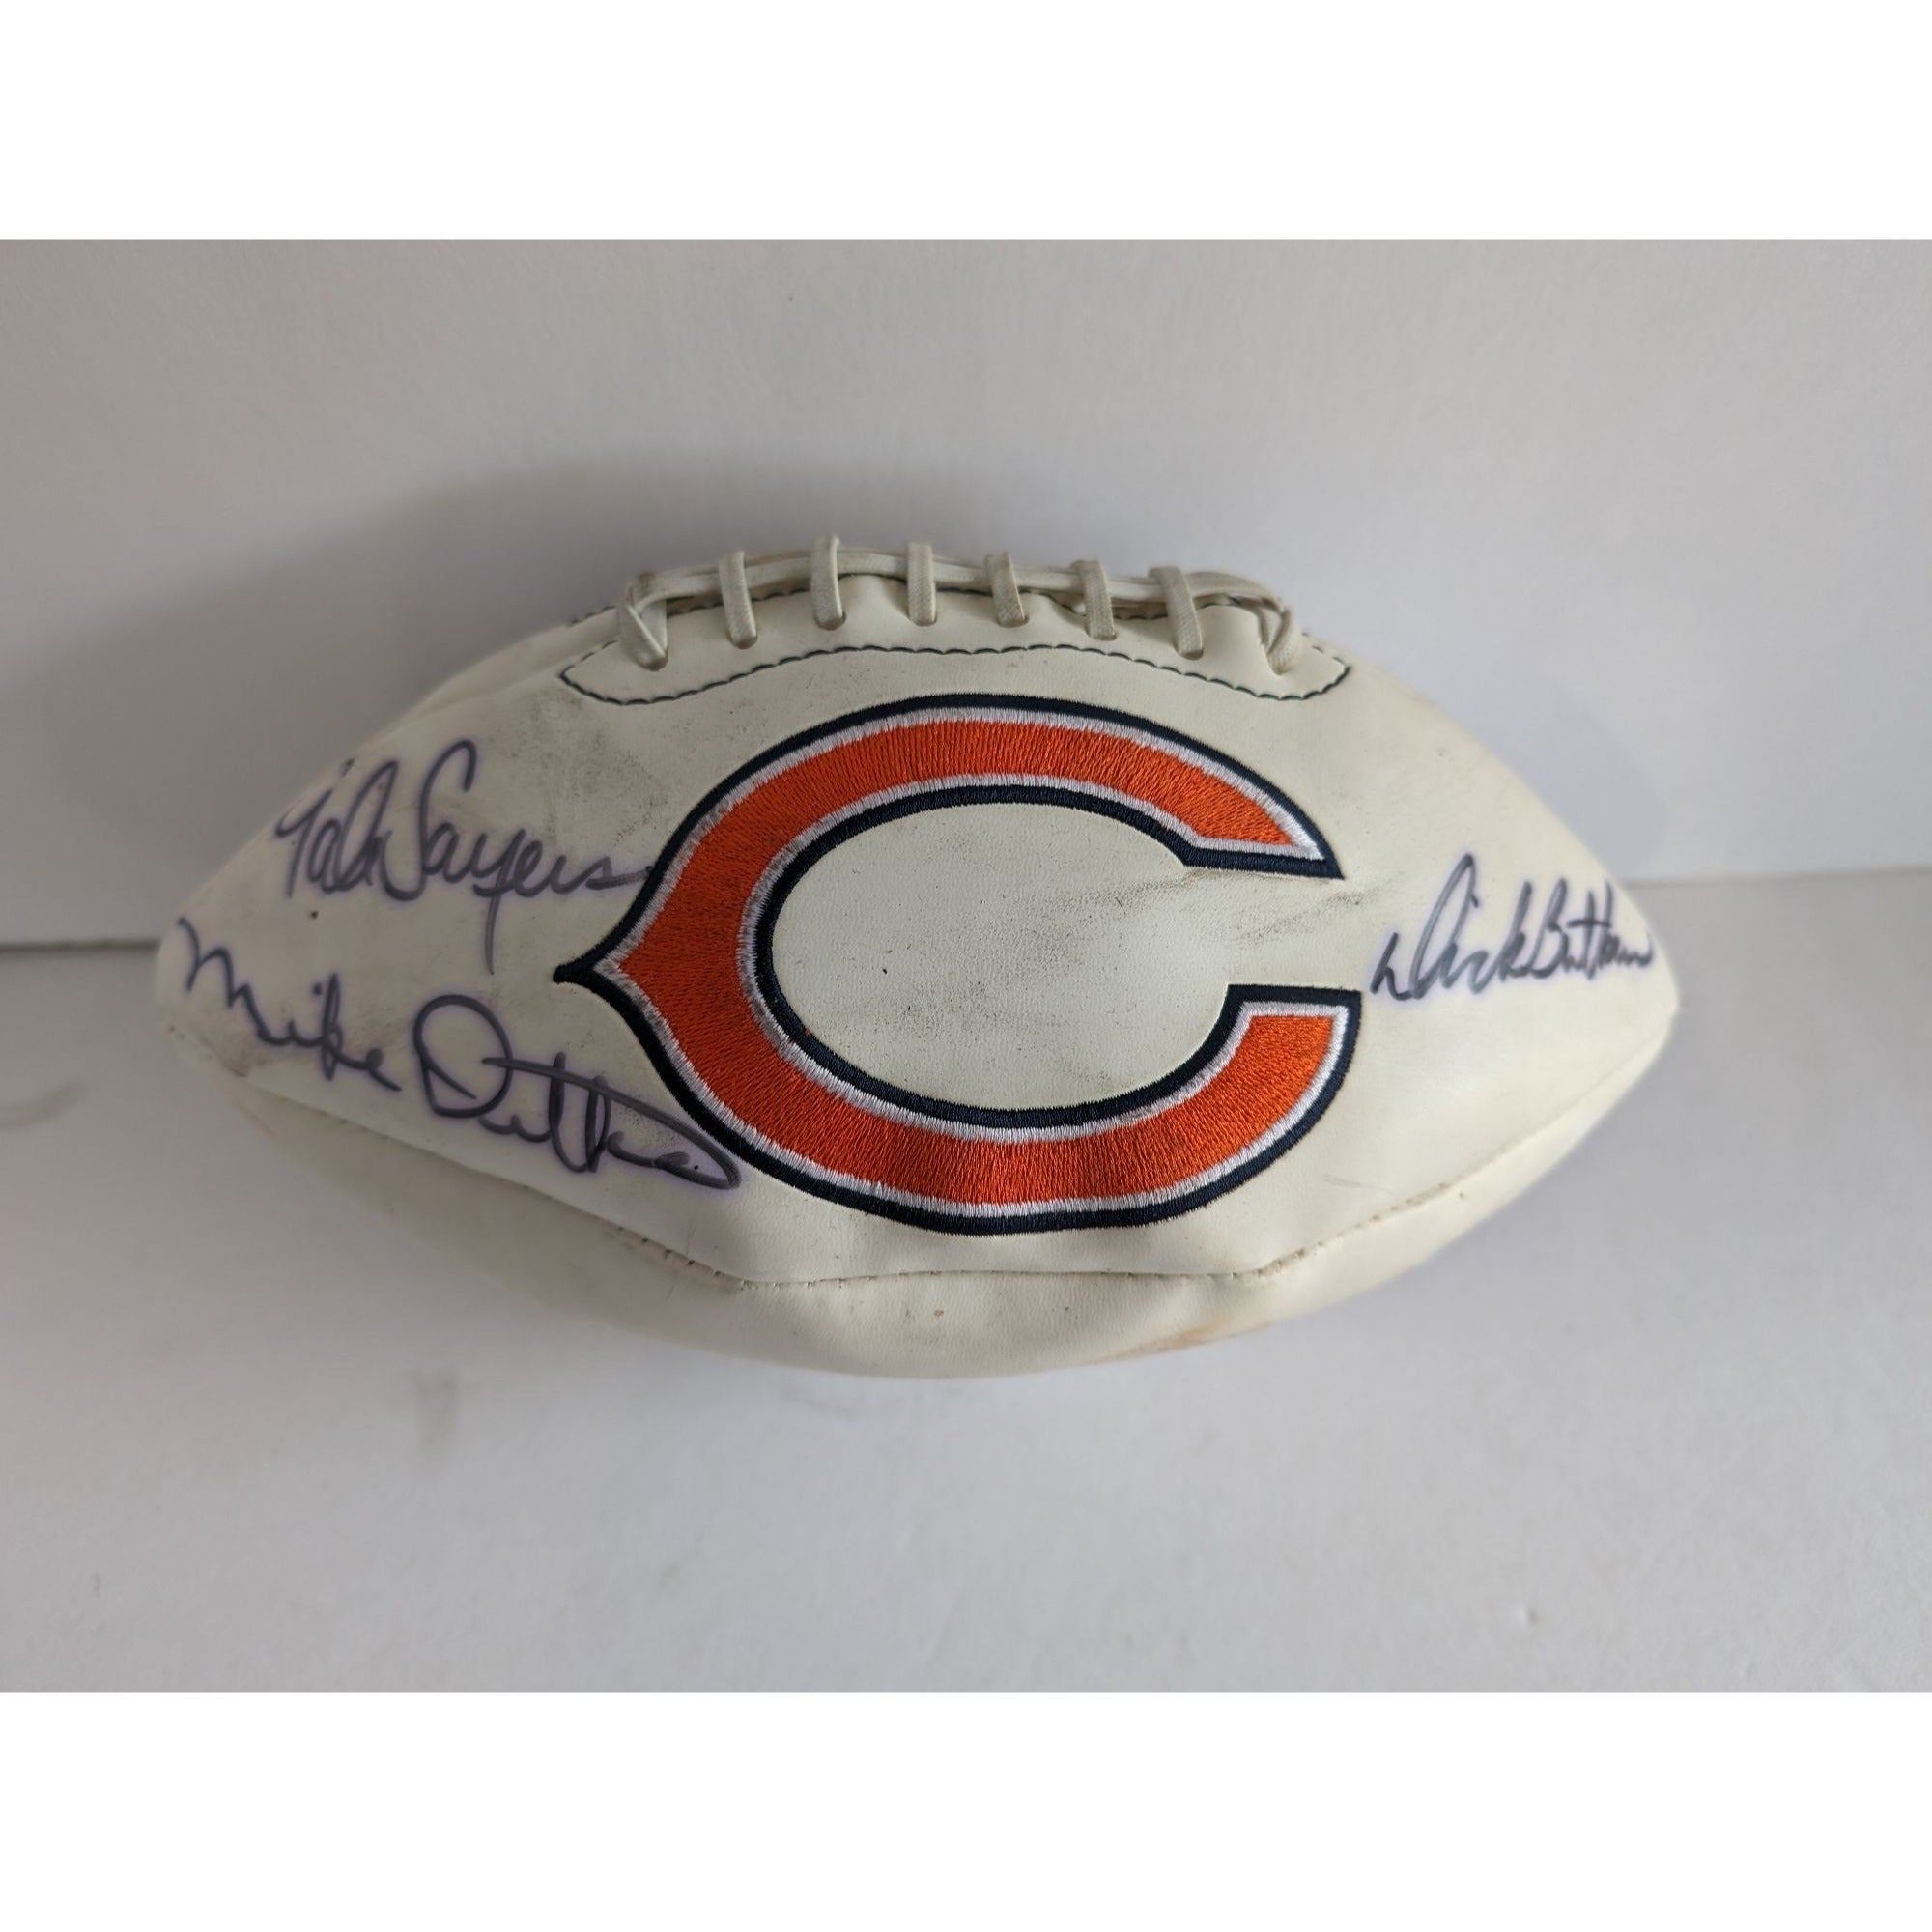 Chicago Bears Dick Butkus Gale Sayers Mike Ditka full size football signed